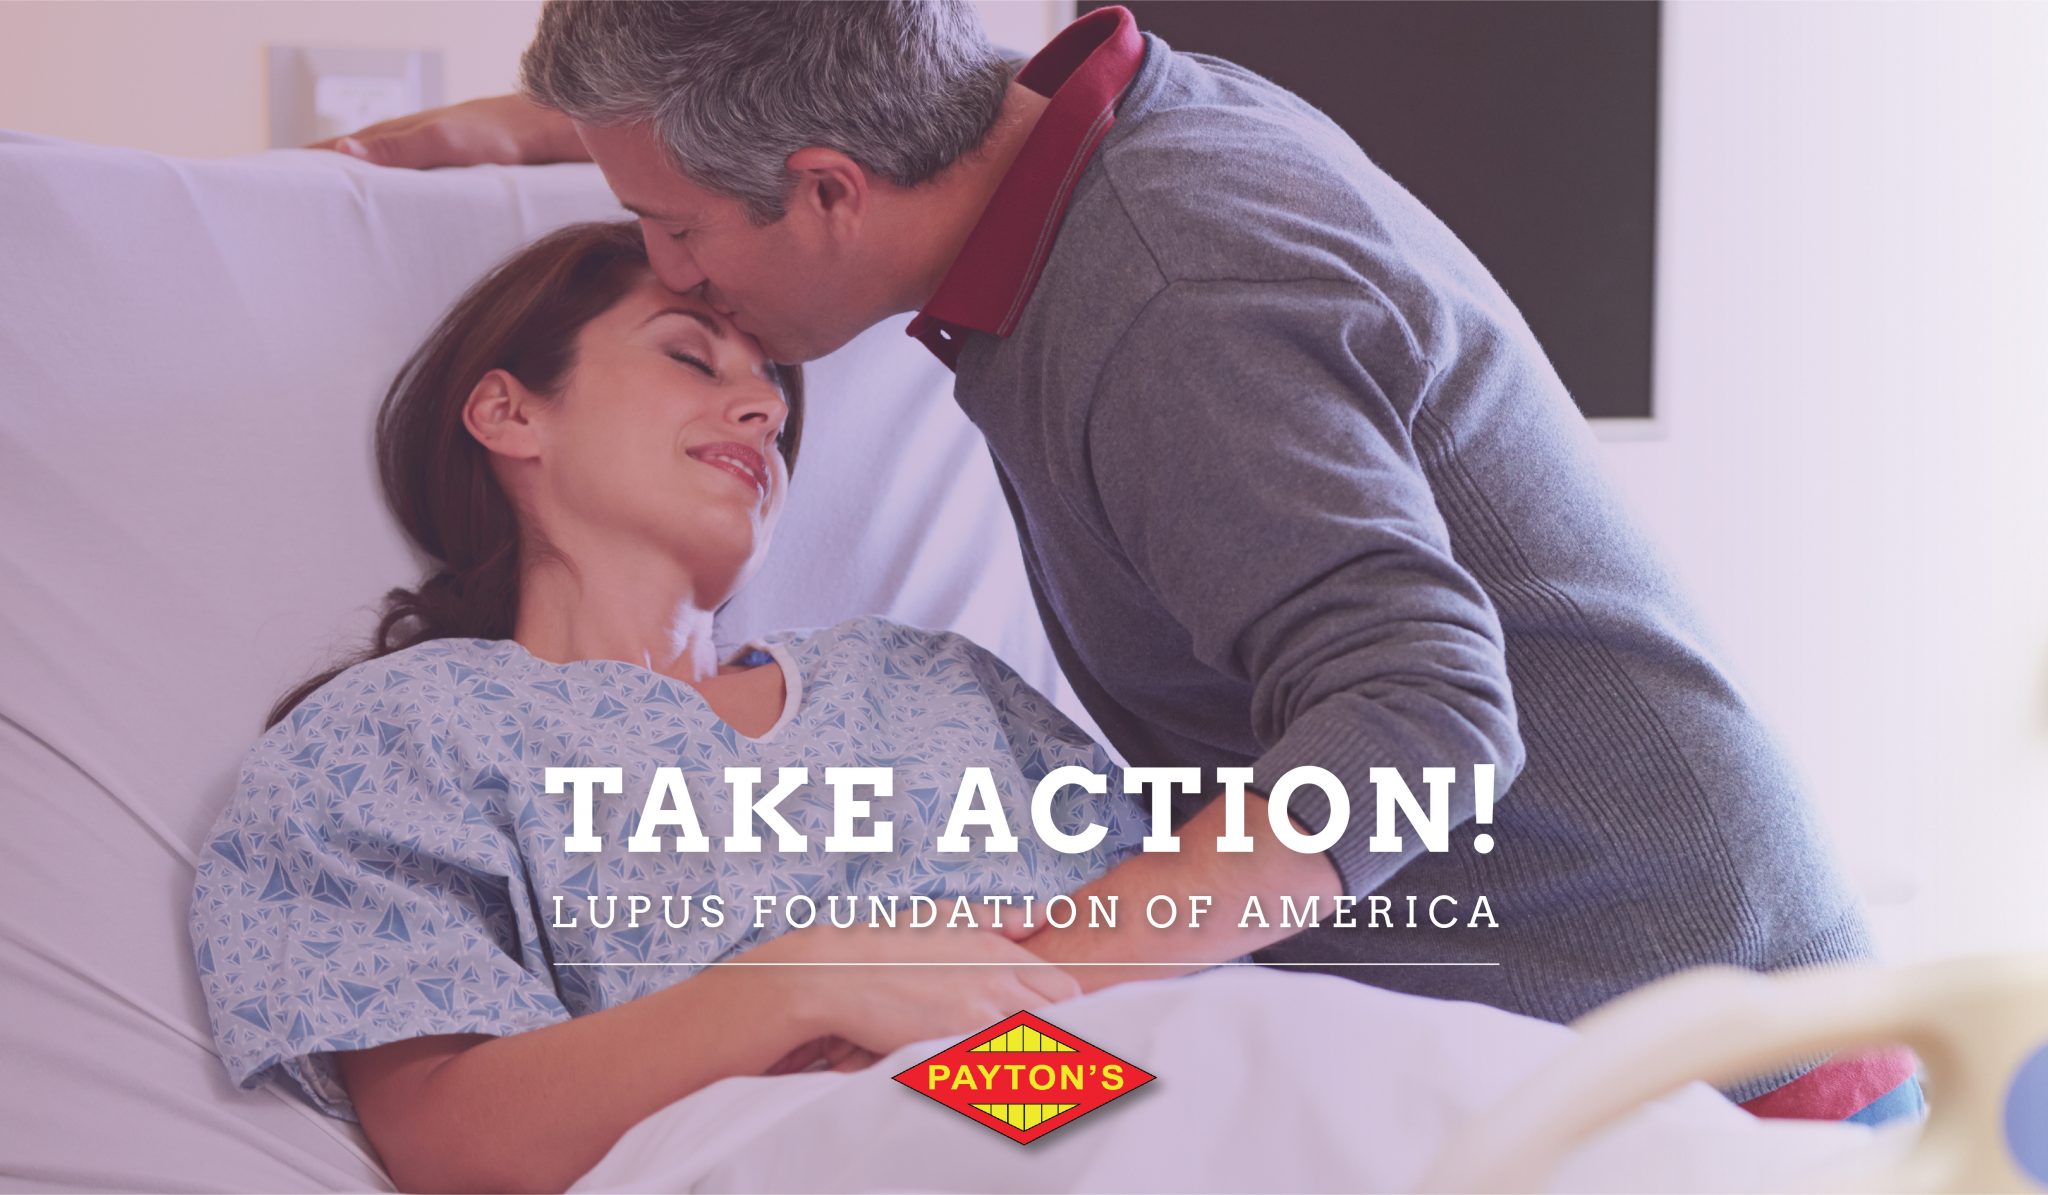 Take action and help us find a cure for Lupus.